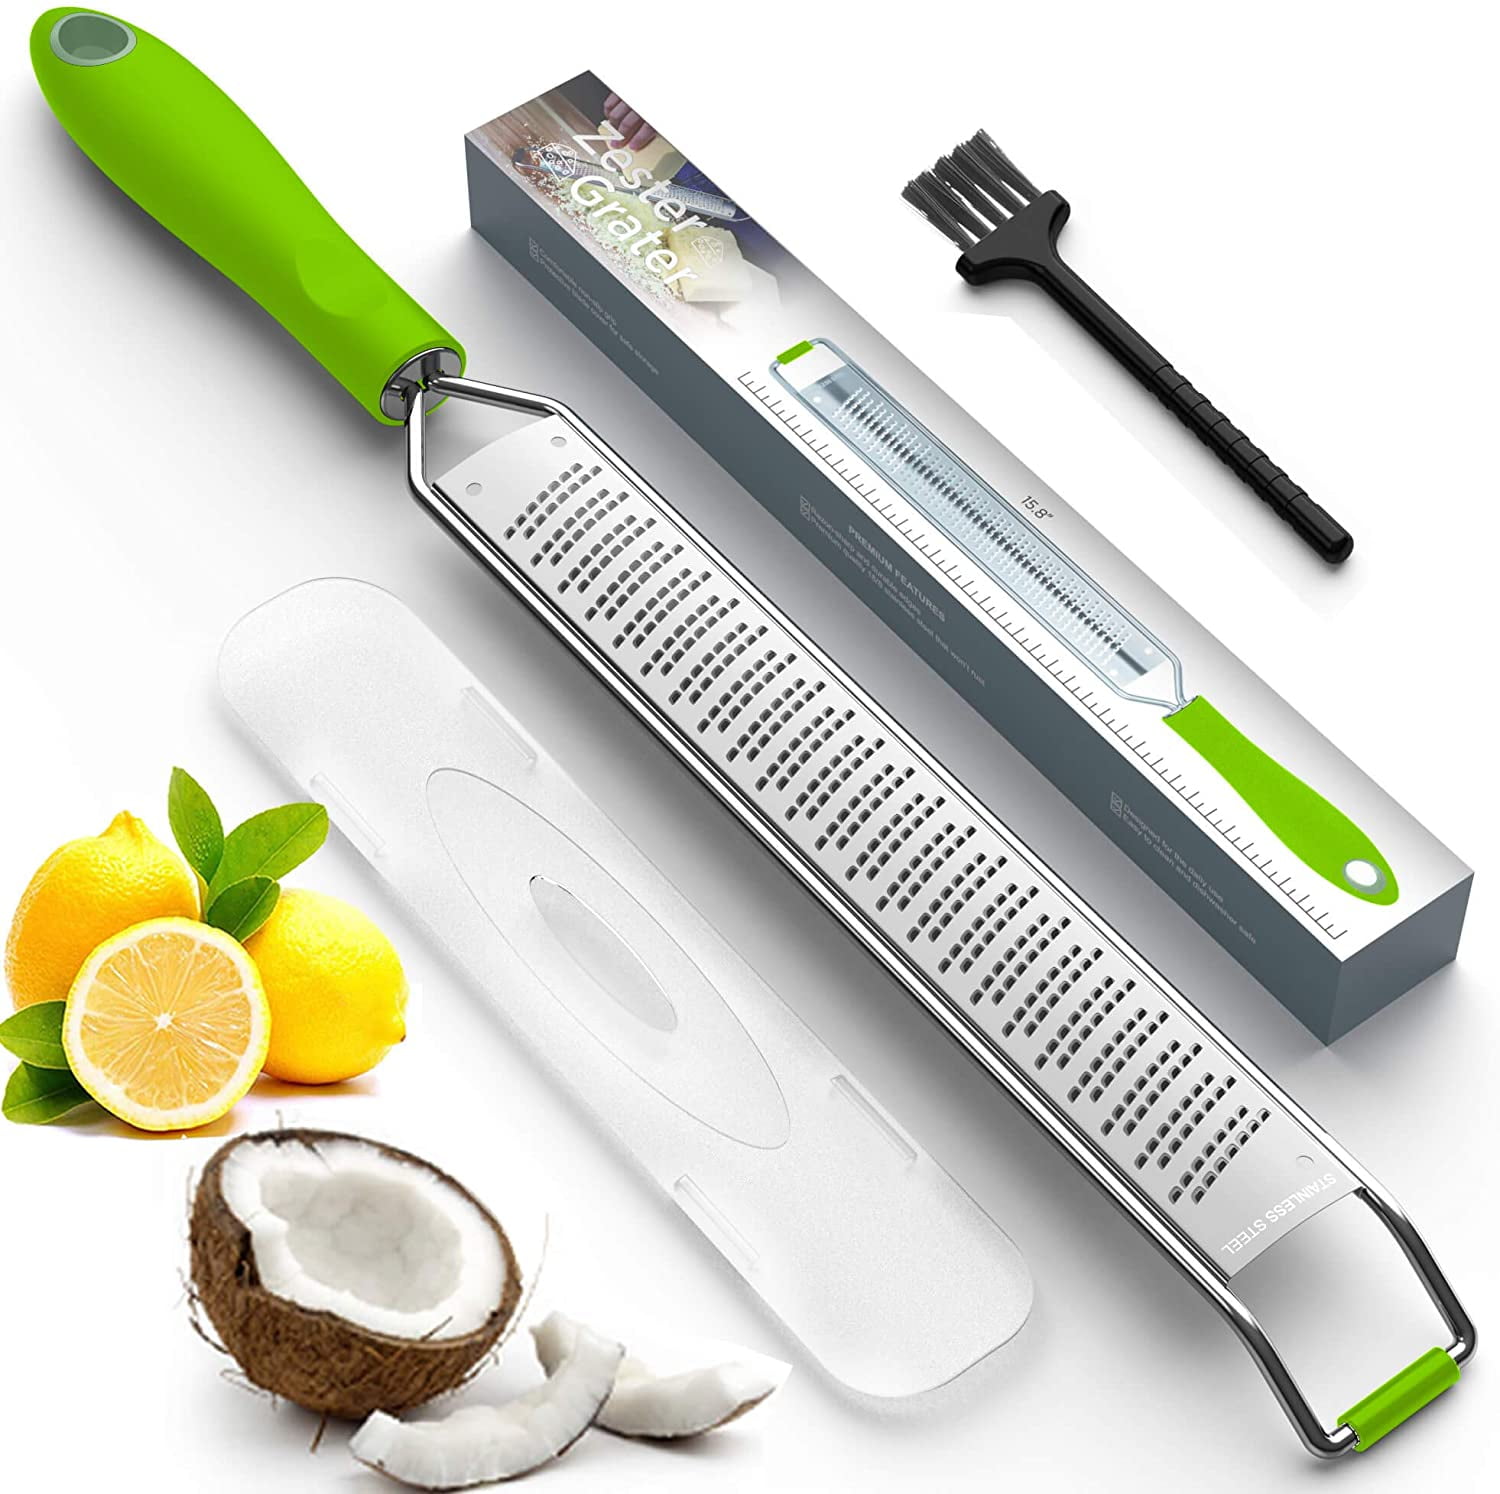 Non-Slip Grip Handle Updated 2021 Version Multipurpose Zester Grater Grater for Cheese Garlic Green Chocolate Premium Stainless Steel 